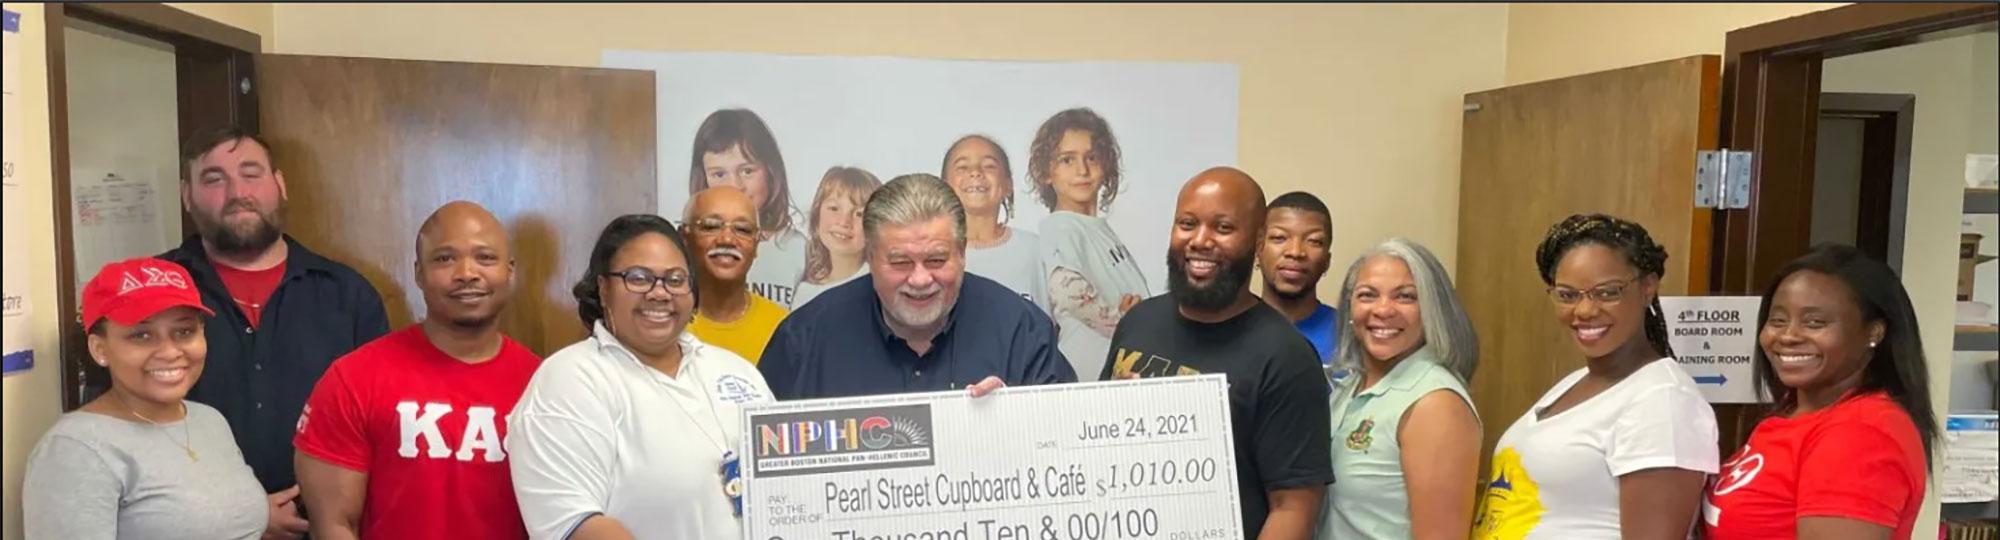 Greater Boston Pan-Hellenic Council presents check to Pearl St. Cupboard & Café